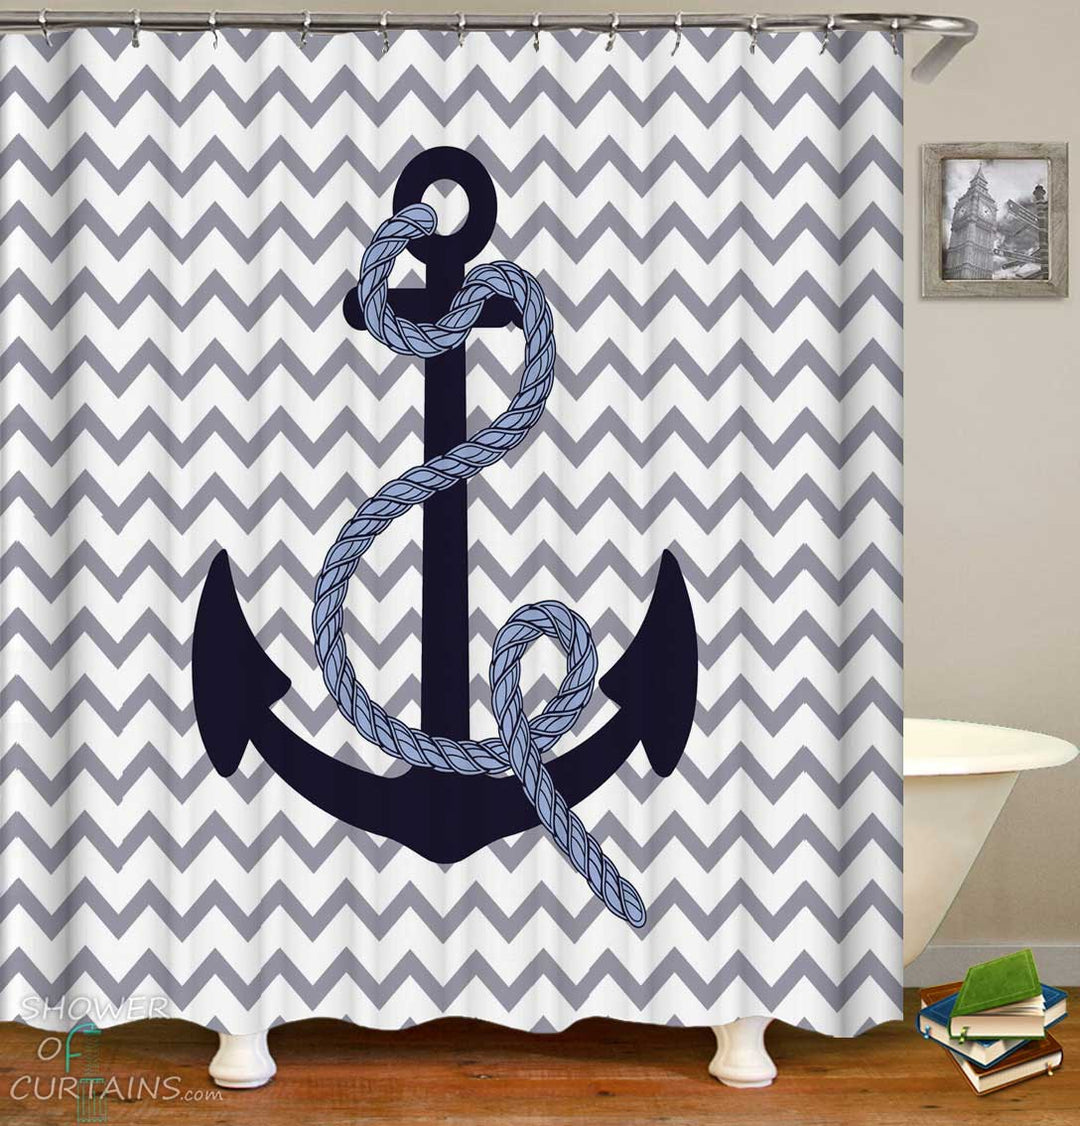 Shower Curtains with Anchor and Rope Over Chevron